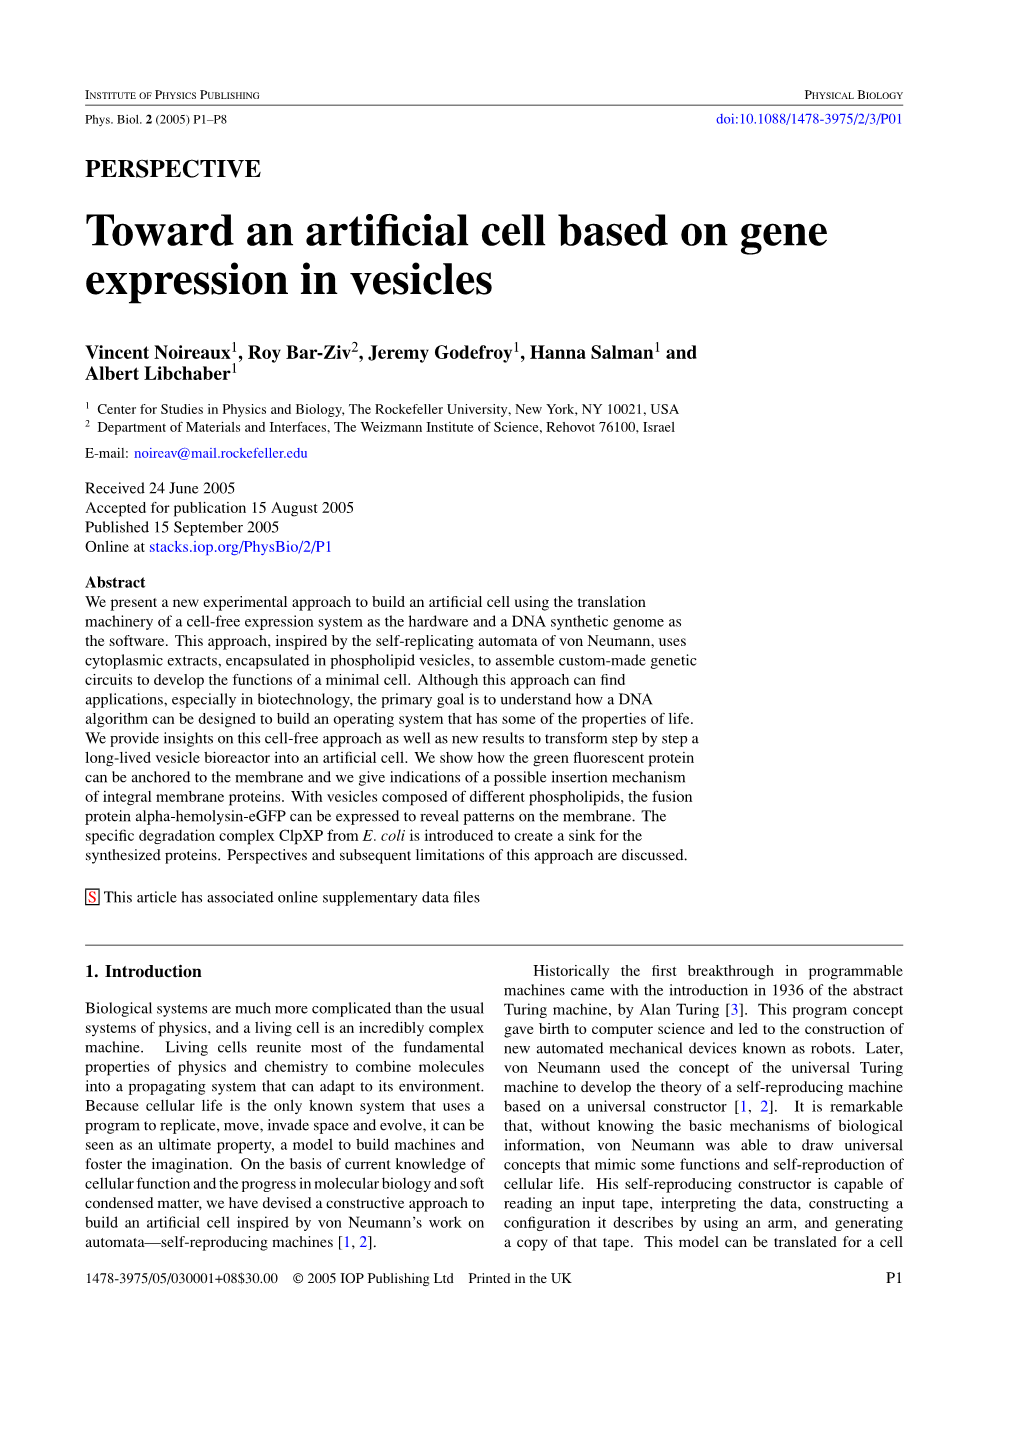 Toward an Artificial Cell Based on Gene Expression in Vesicles